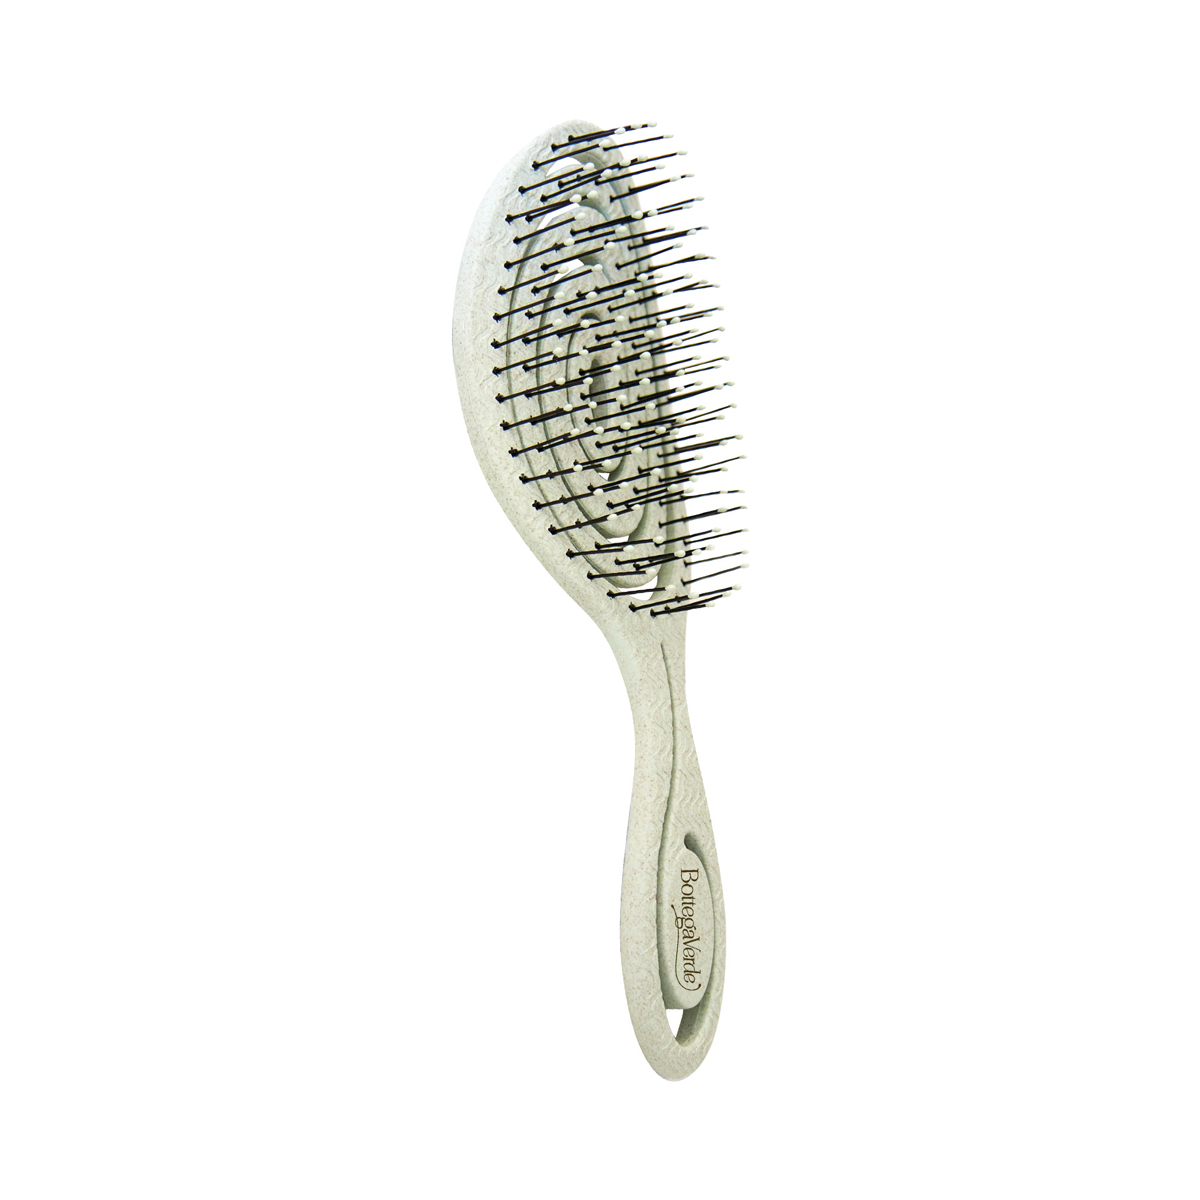 Knot removal brush - for all hair types